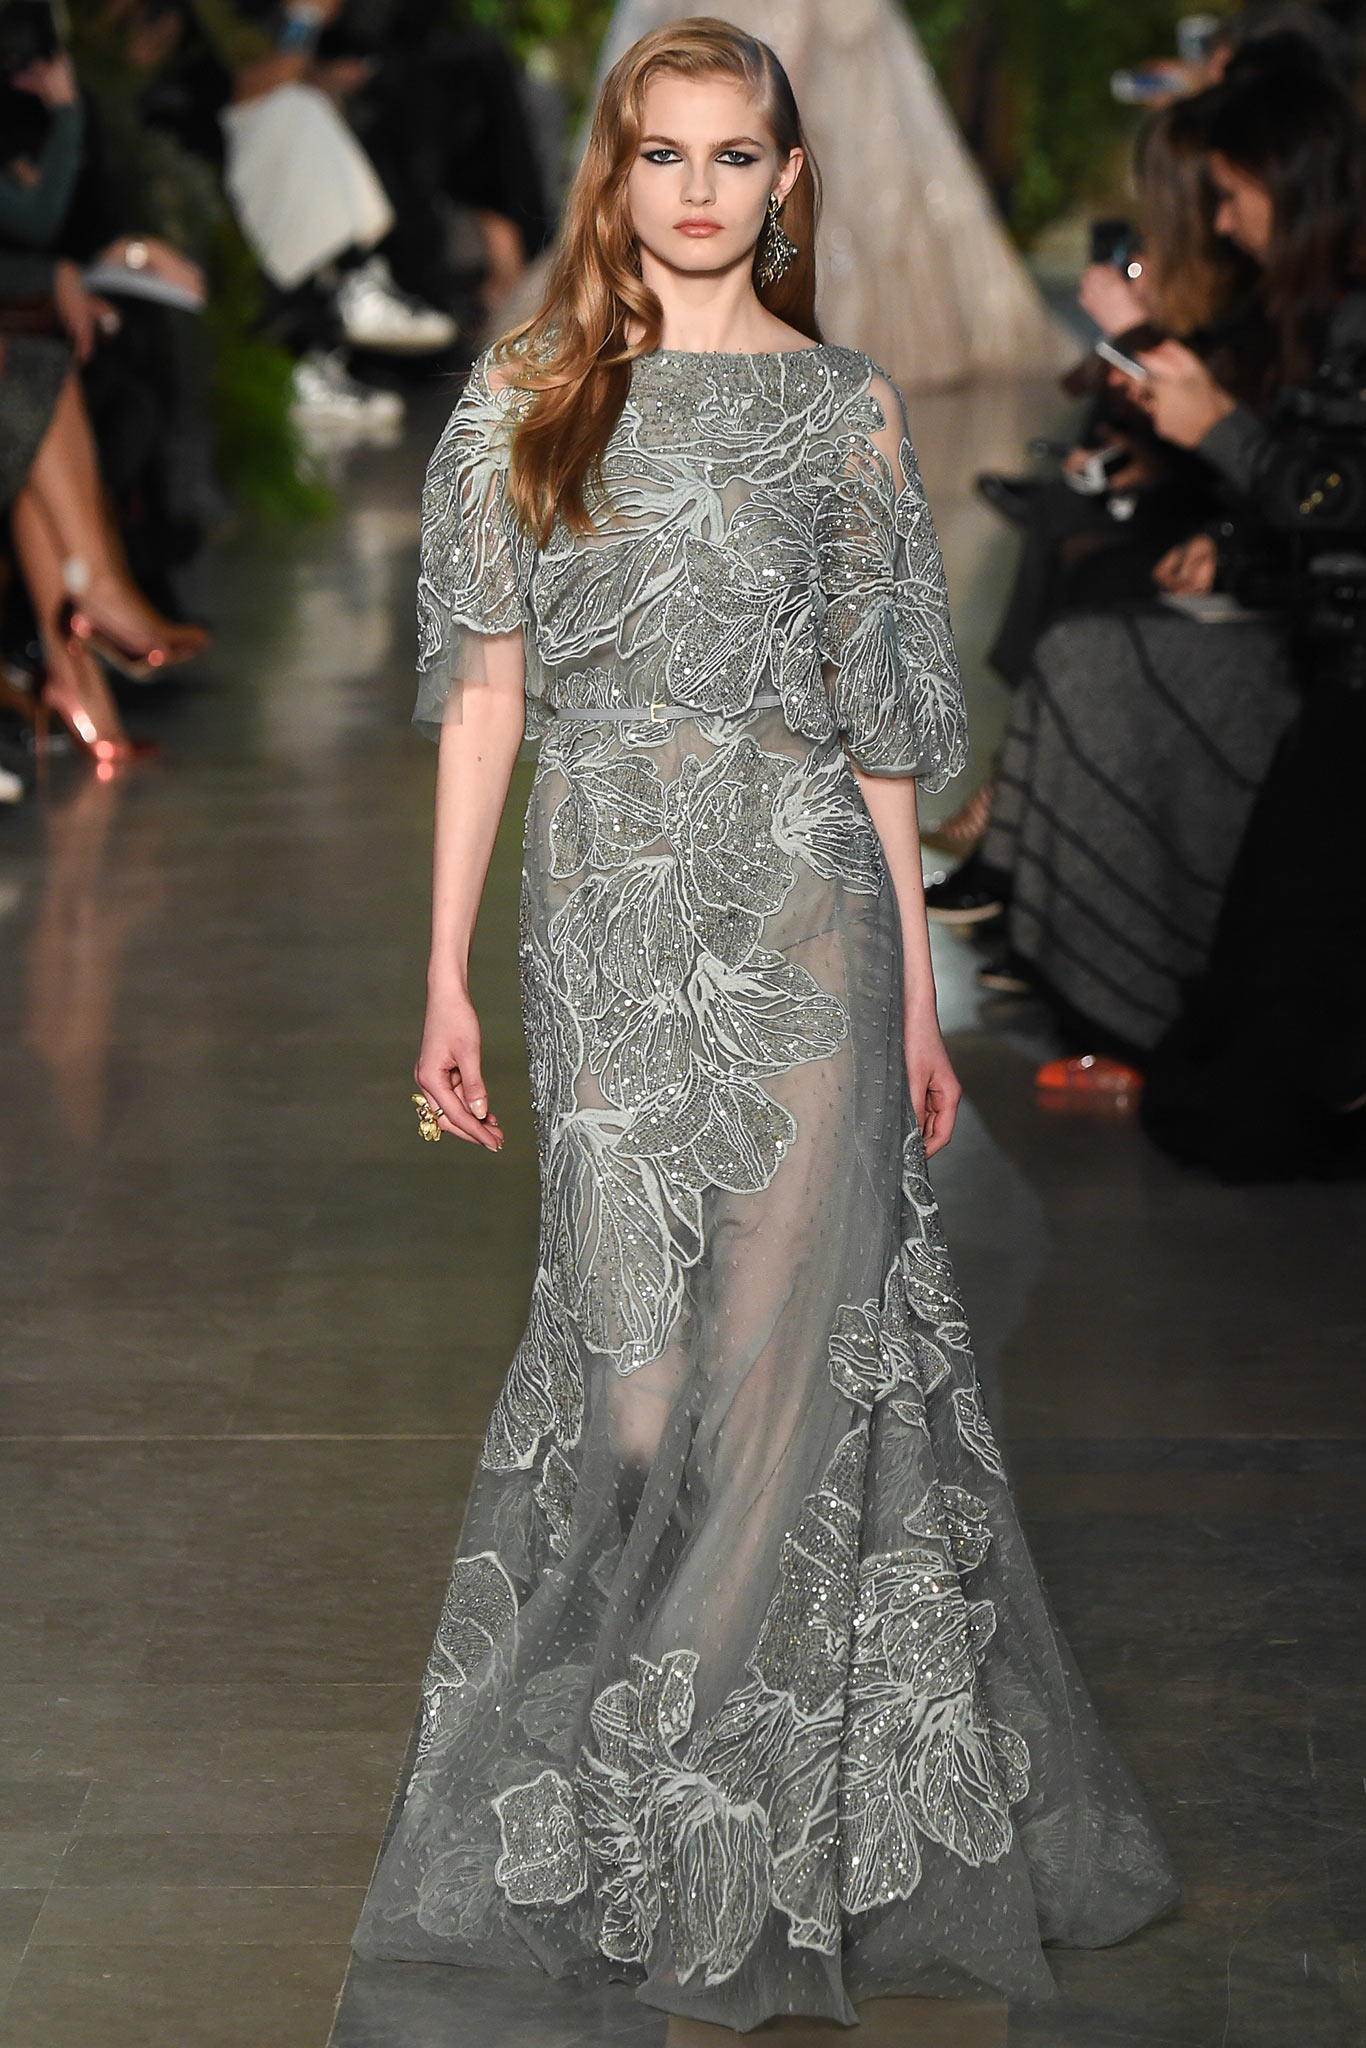 Style Inspiration: Elie Saab Couture Spring 2015 – Project FairyTale